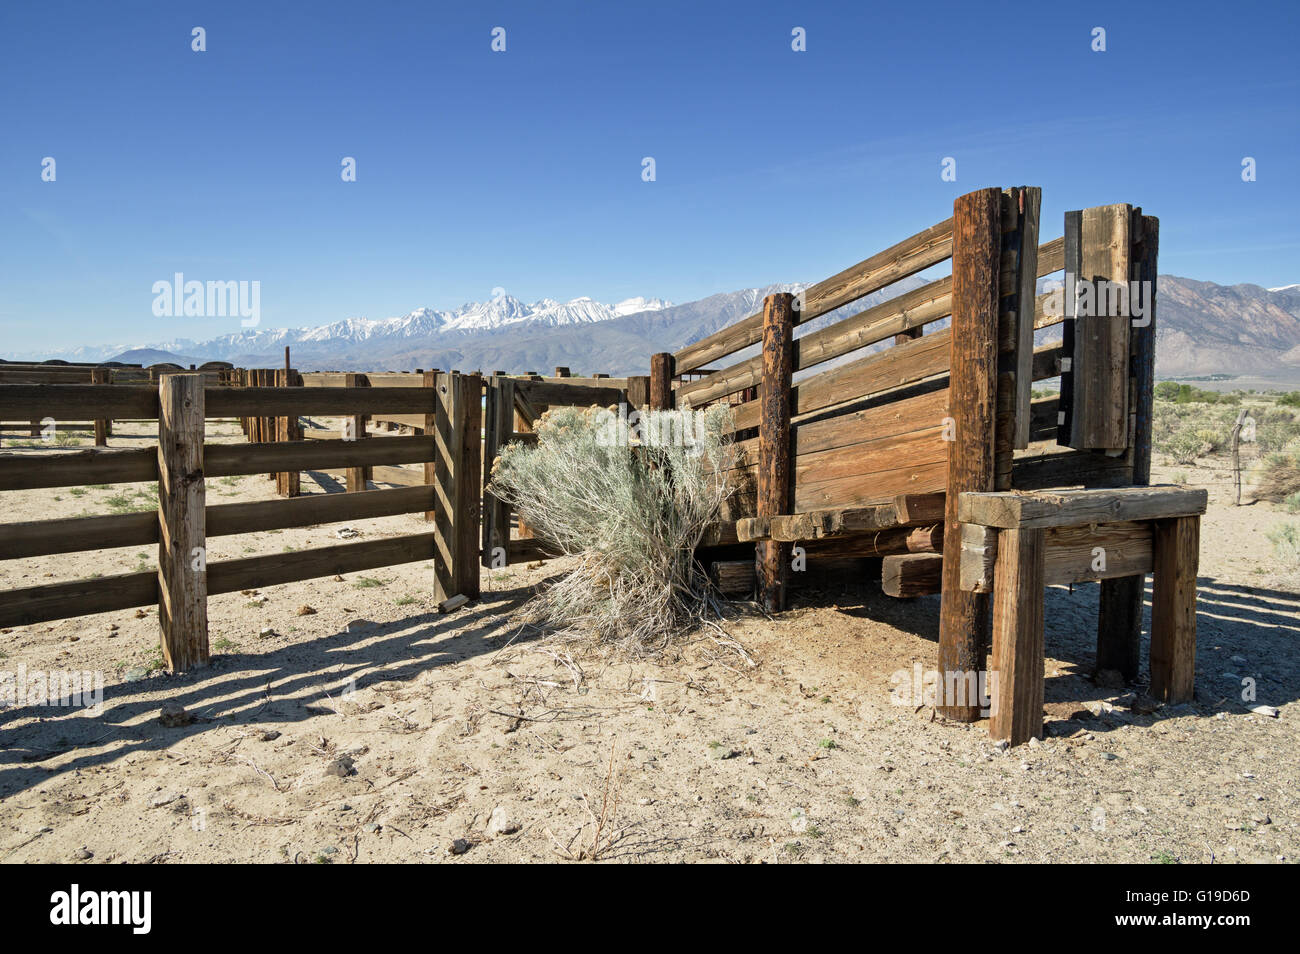 coral and cattle chute in the Owens Valley of California Stock Photo